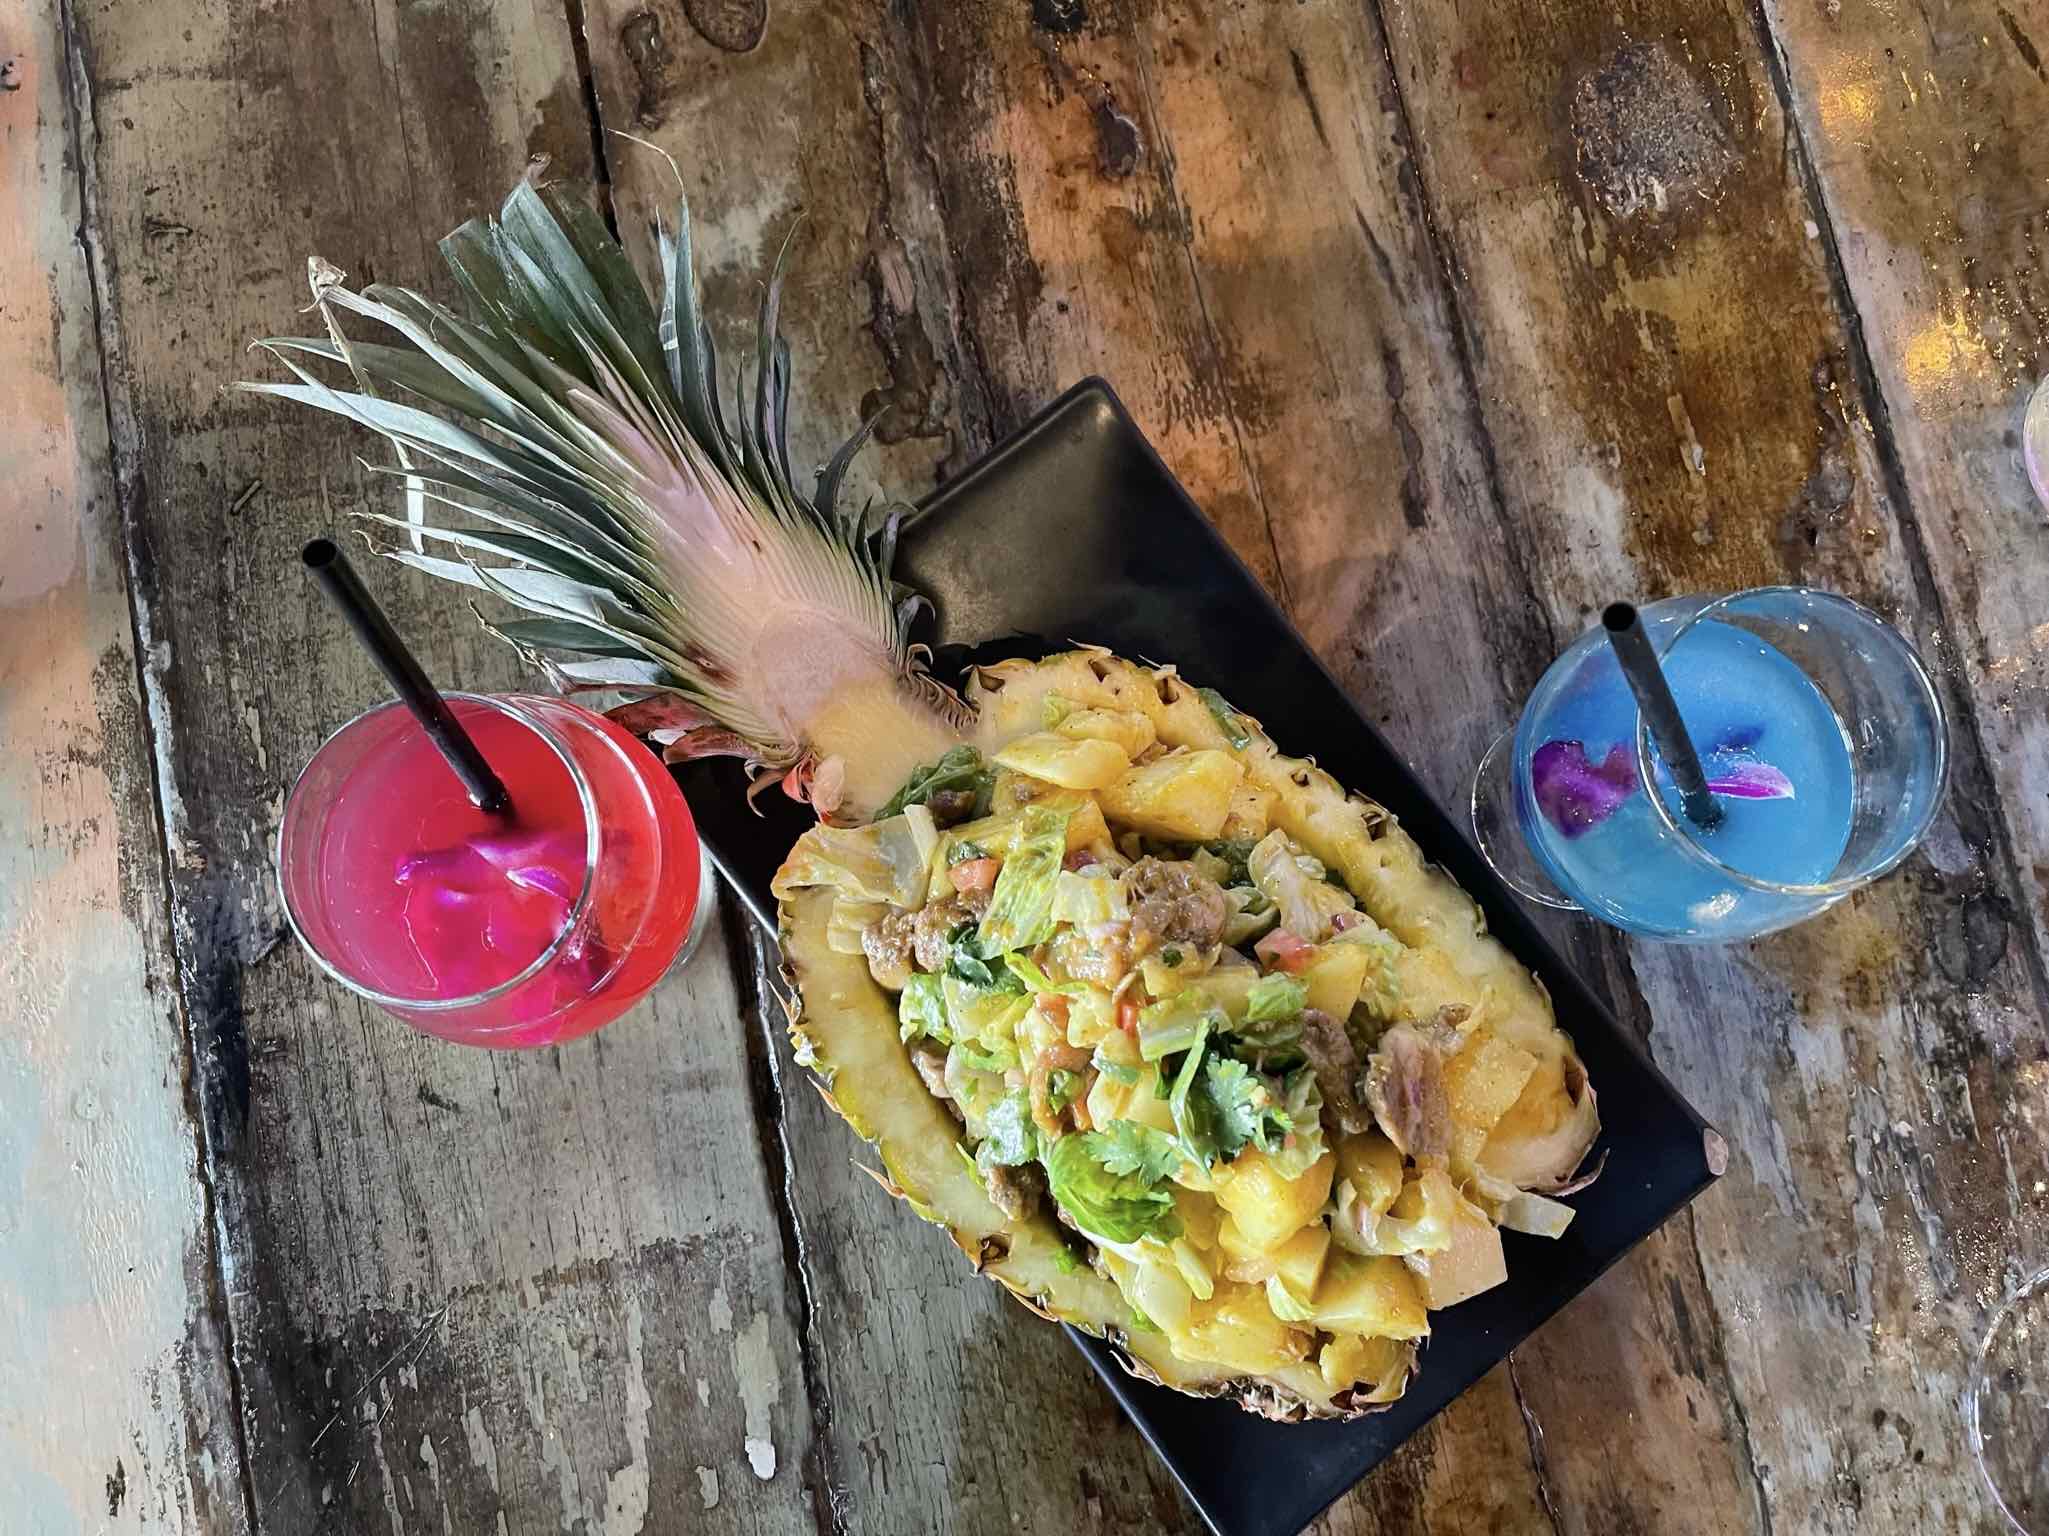 Pineapple fried rice and cocktails at Holman Draft Hall